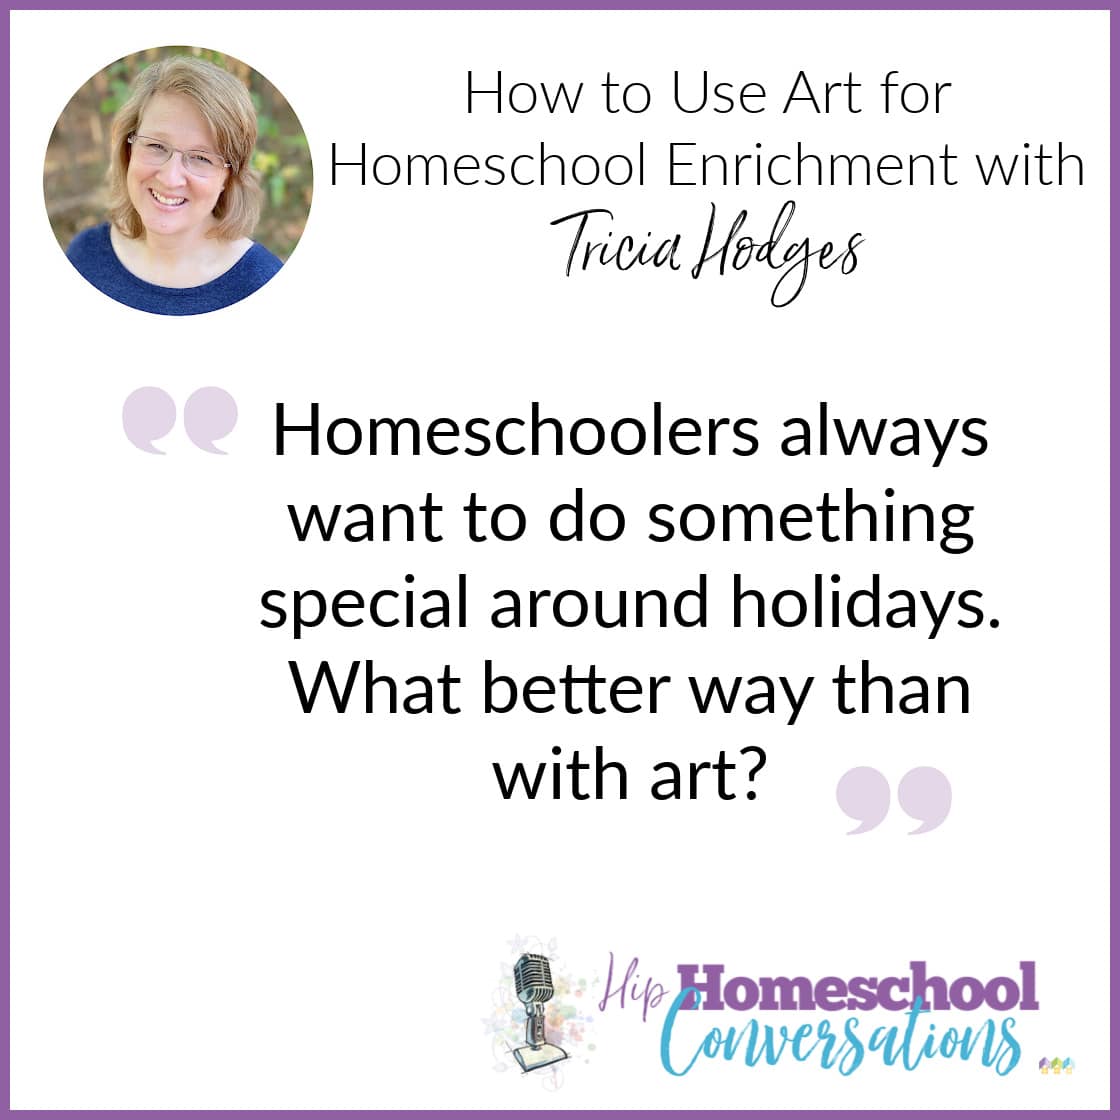 Join us as Tricia discusses how finding subjects that all of your students can do together can be challenging, but art is one way to bring everyone together to create homeschooling memories that you will cherish.